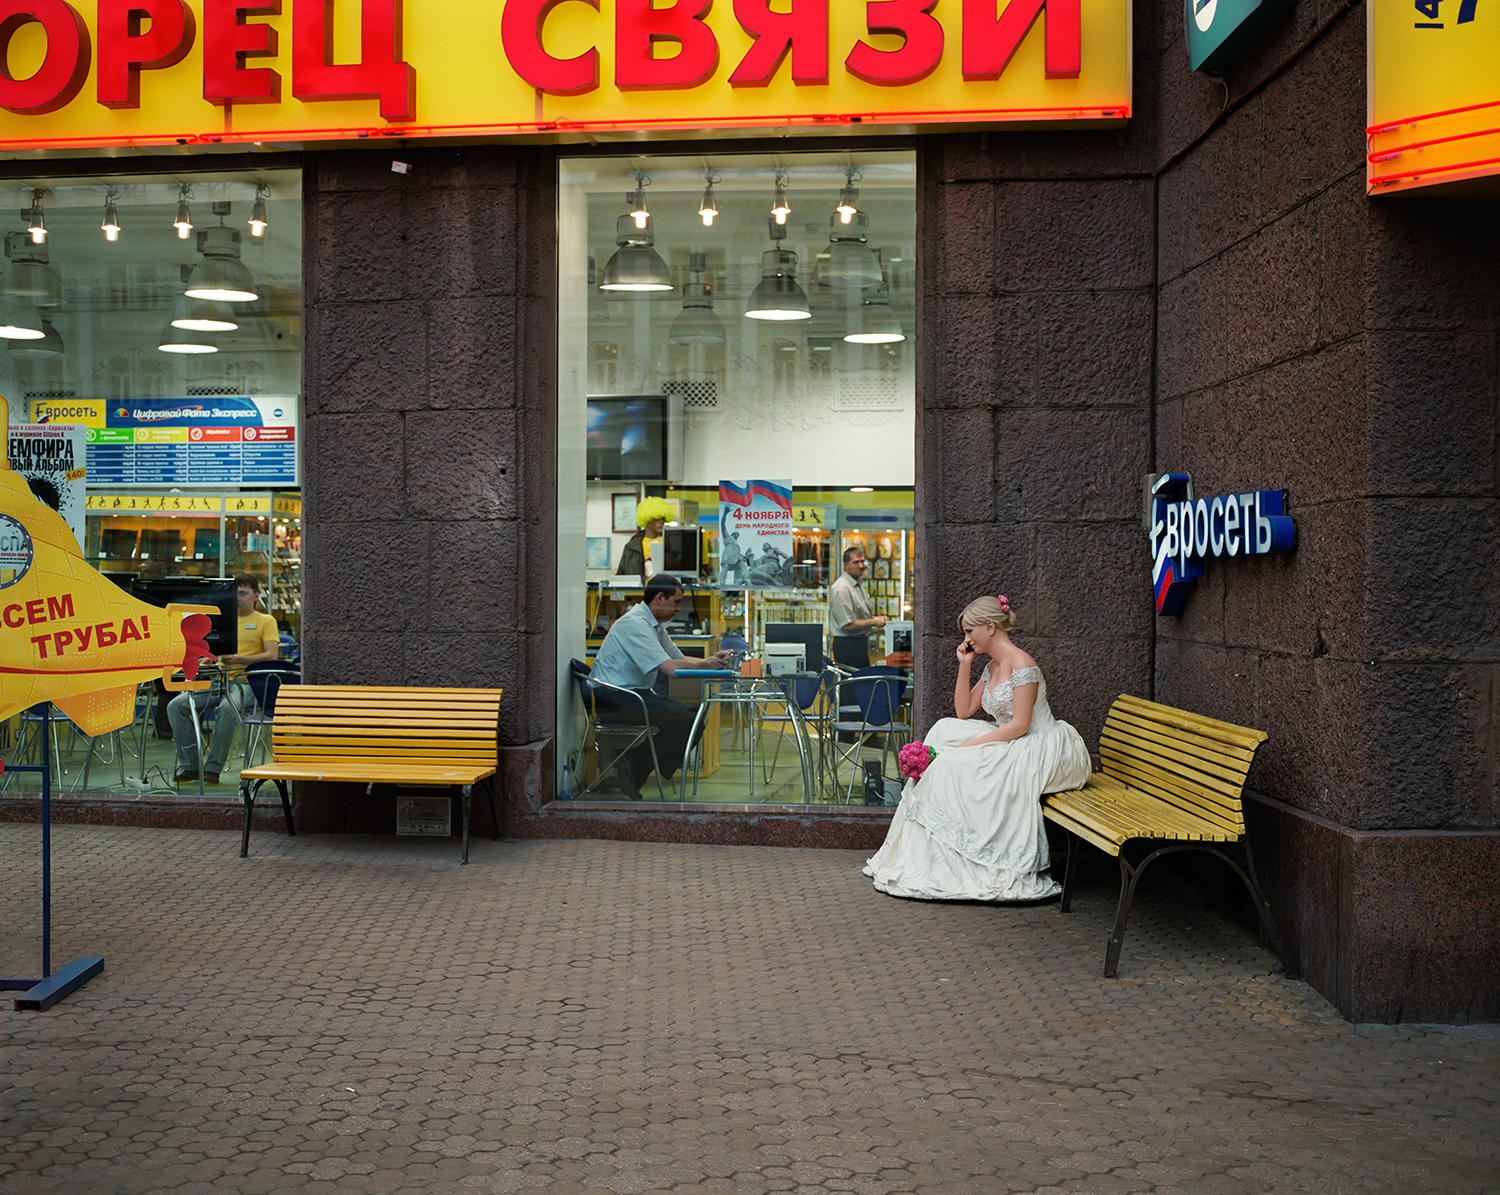  MOSCOW, RUSSIA 2008 